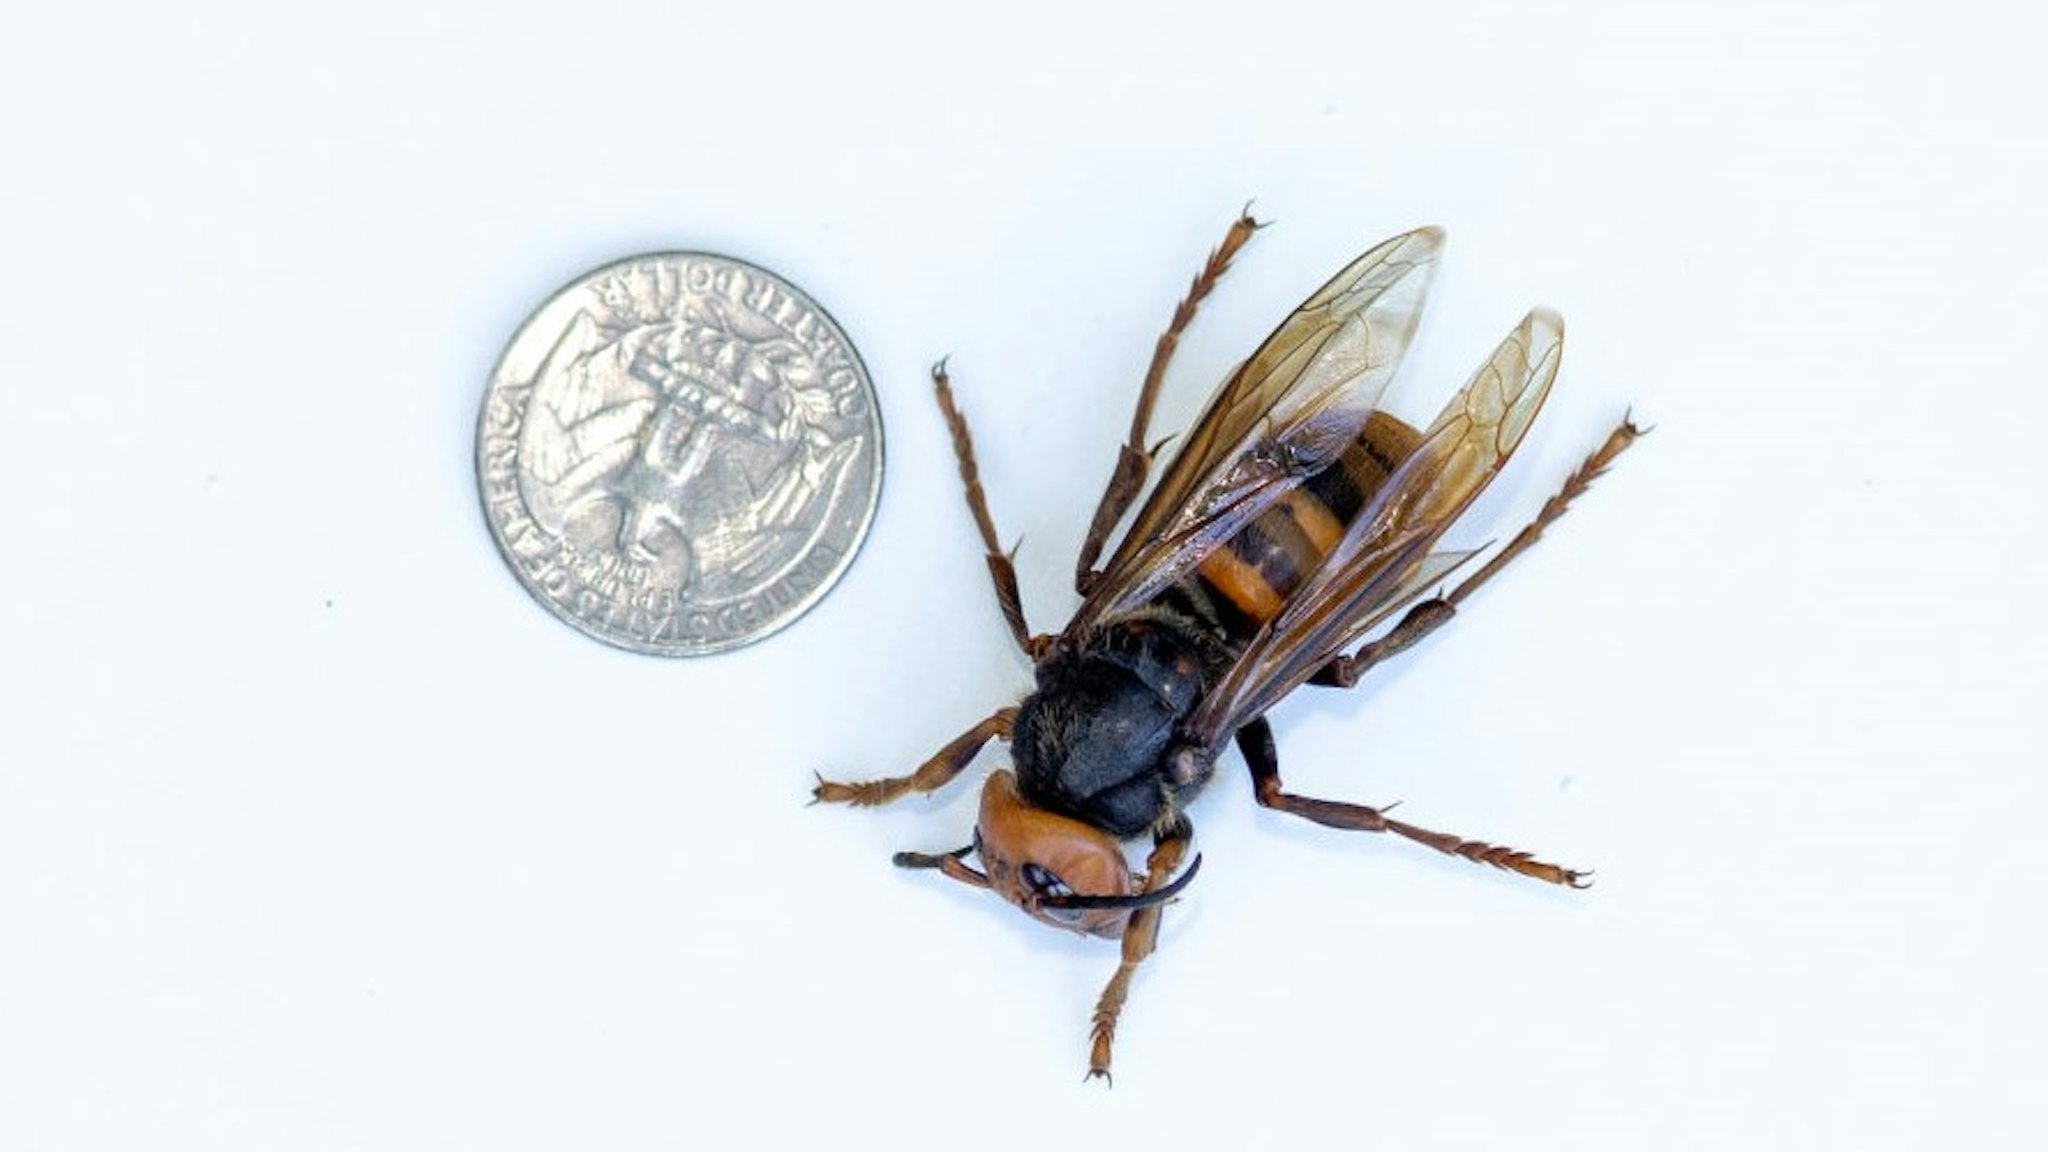 BELLINGHAM, WA - JULY 29: A sample specimen of a dead Asian Giant Hornet from Japan, also known as a murder hornet, is shown next to a U.S. quarter on July 29, 2020 in Bellingham, Washington. Asian giant hornets attack and destroy honeybee hives. The Washington State Department of Agriculture (WSDA) currently has 442 traps throughout the state. To date, five Asian Giant Hornets have been found in Washington state, all by public citizens in Whatcom County. (Photo by